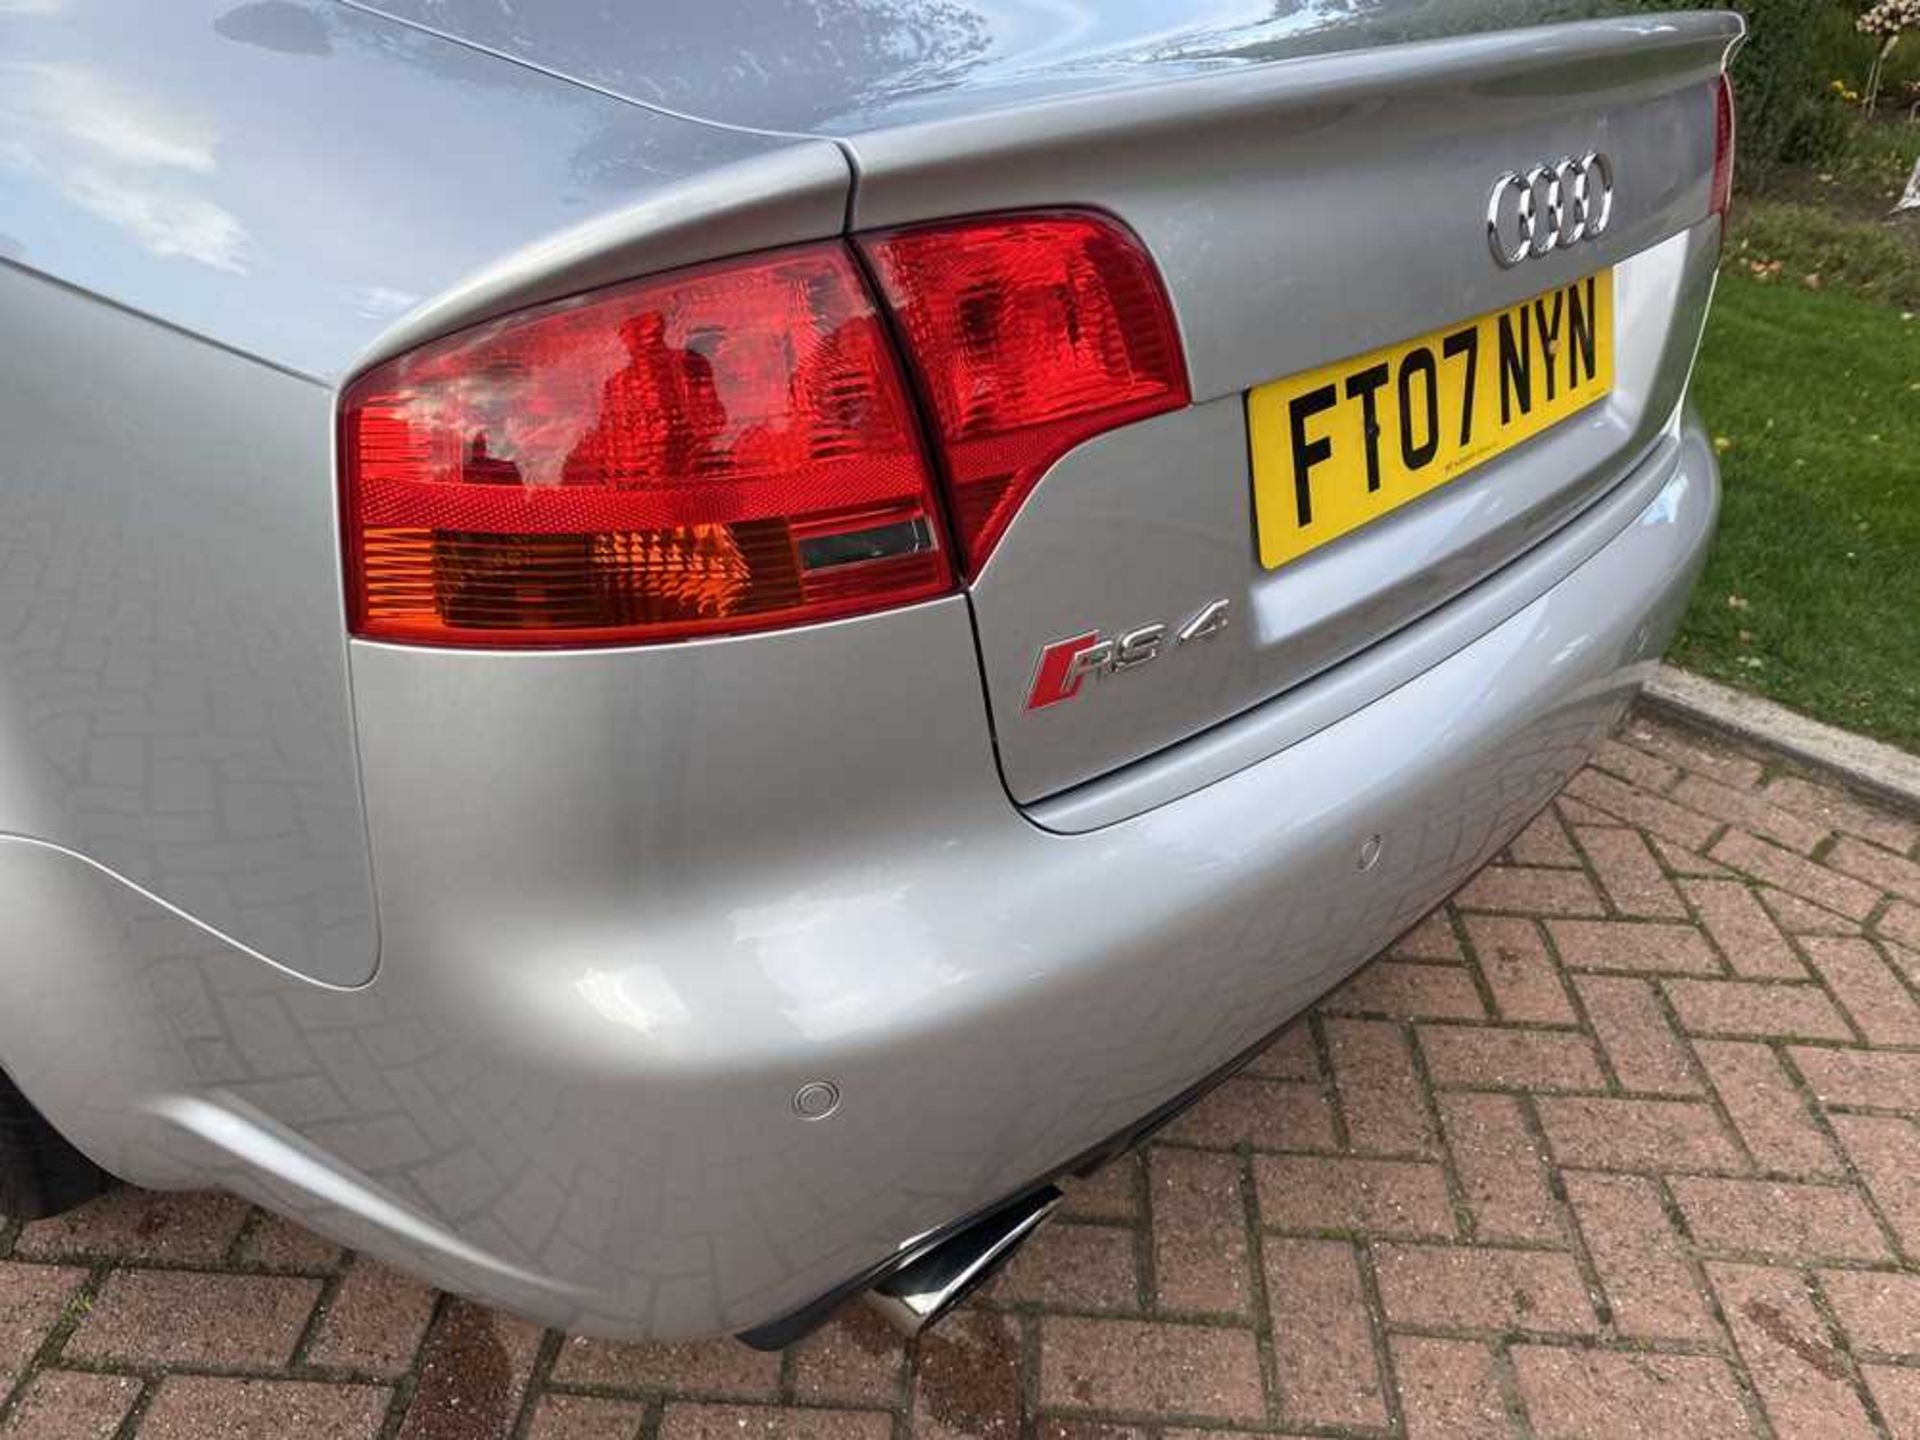 2007 Audi RS4 Saloon One owner and just c.60,000 miles from new - Image 49 of 86